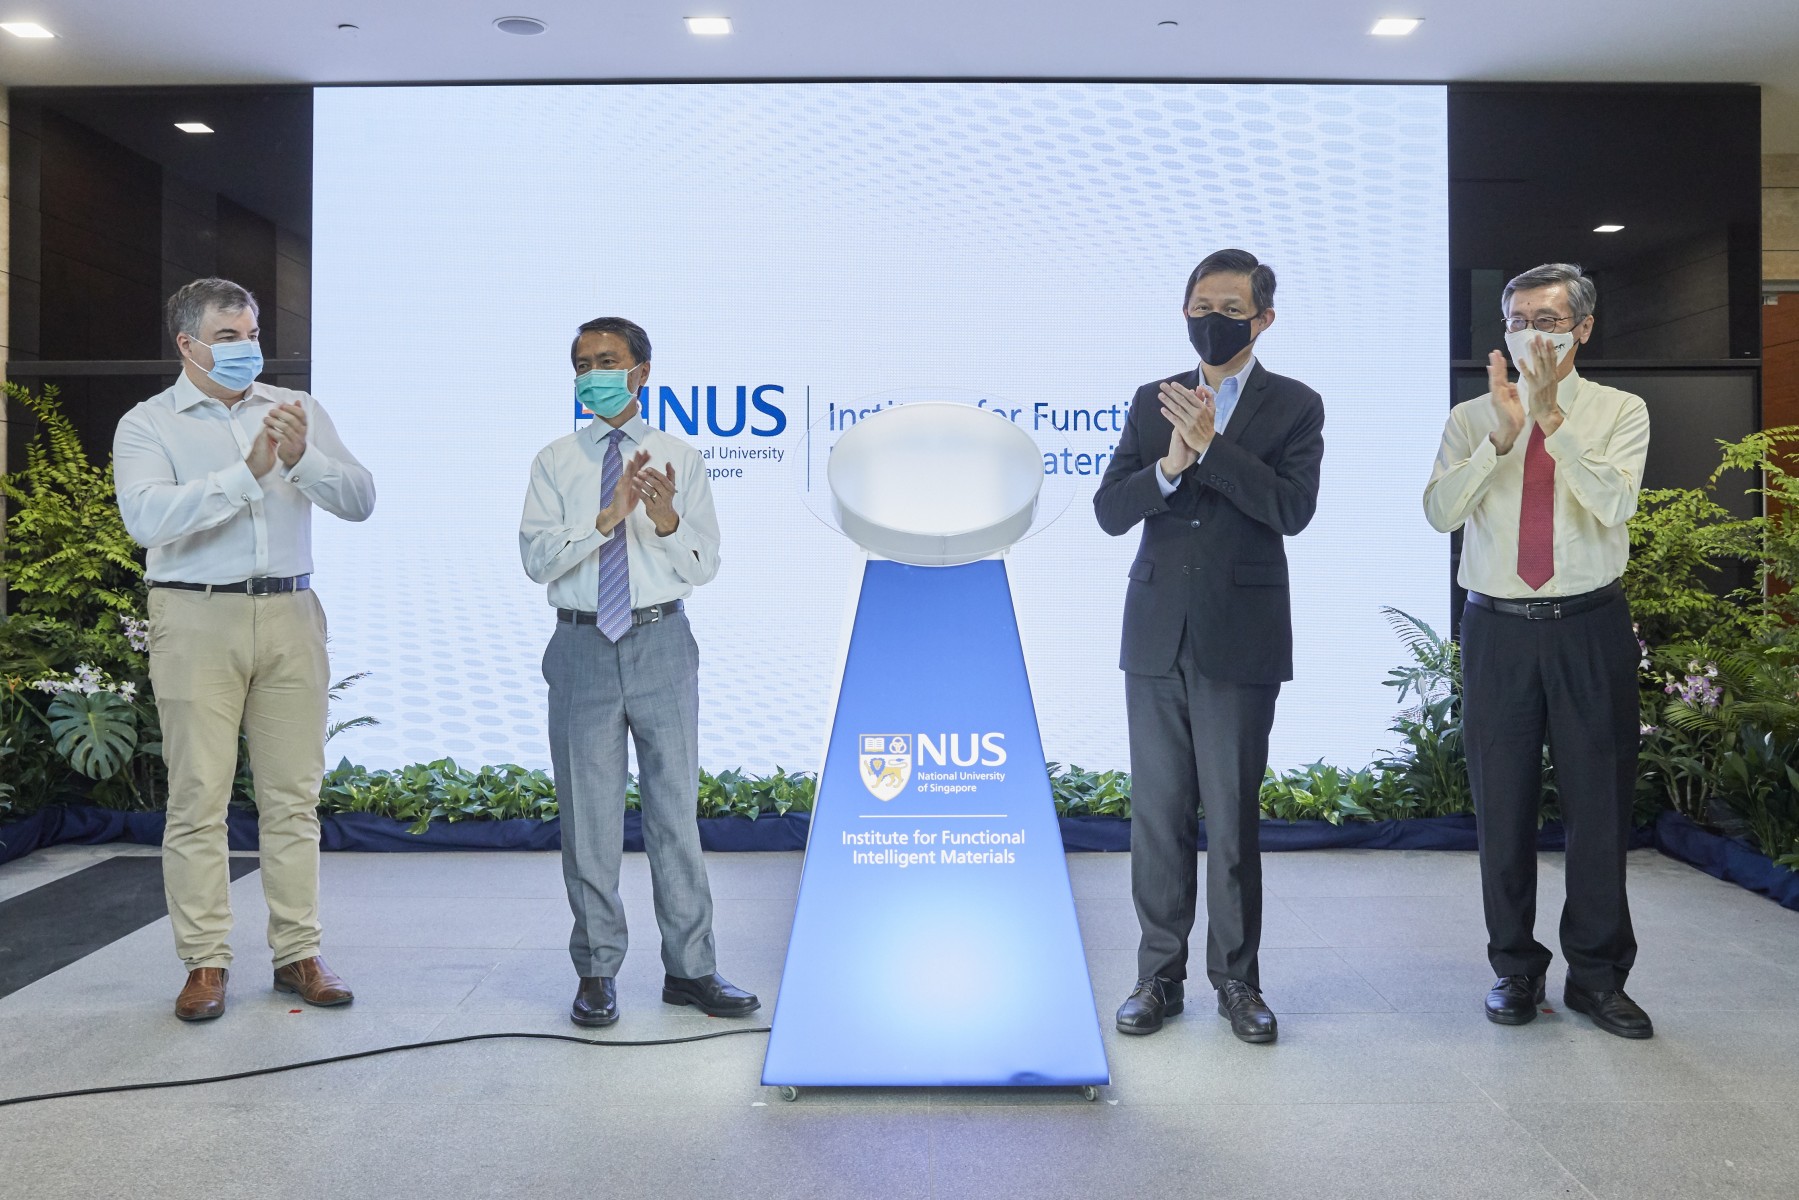 Education Minister Mr Chan Chun Sing (third from left) launched the NUS Institute for Functional Intelligent Materials (I-FIM), accompanied by (left to right) Prof Sir Konstantin Novoselov, I-FIM Director; Mr Hsieh Fu Hua, Chairman of NUS Board of Trustees; and Prof Tan Eng Chye, NUS President.